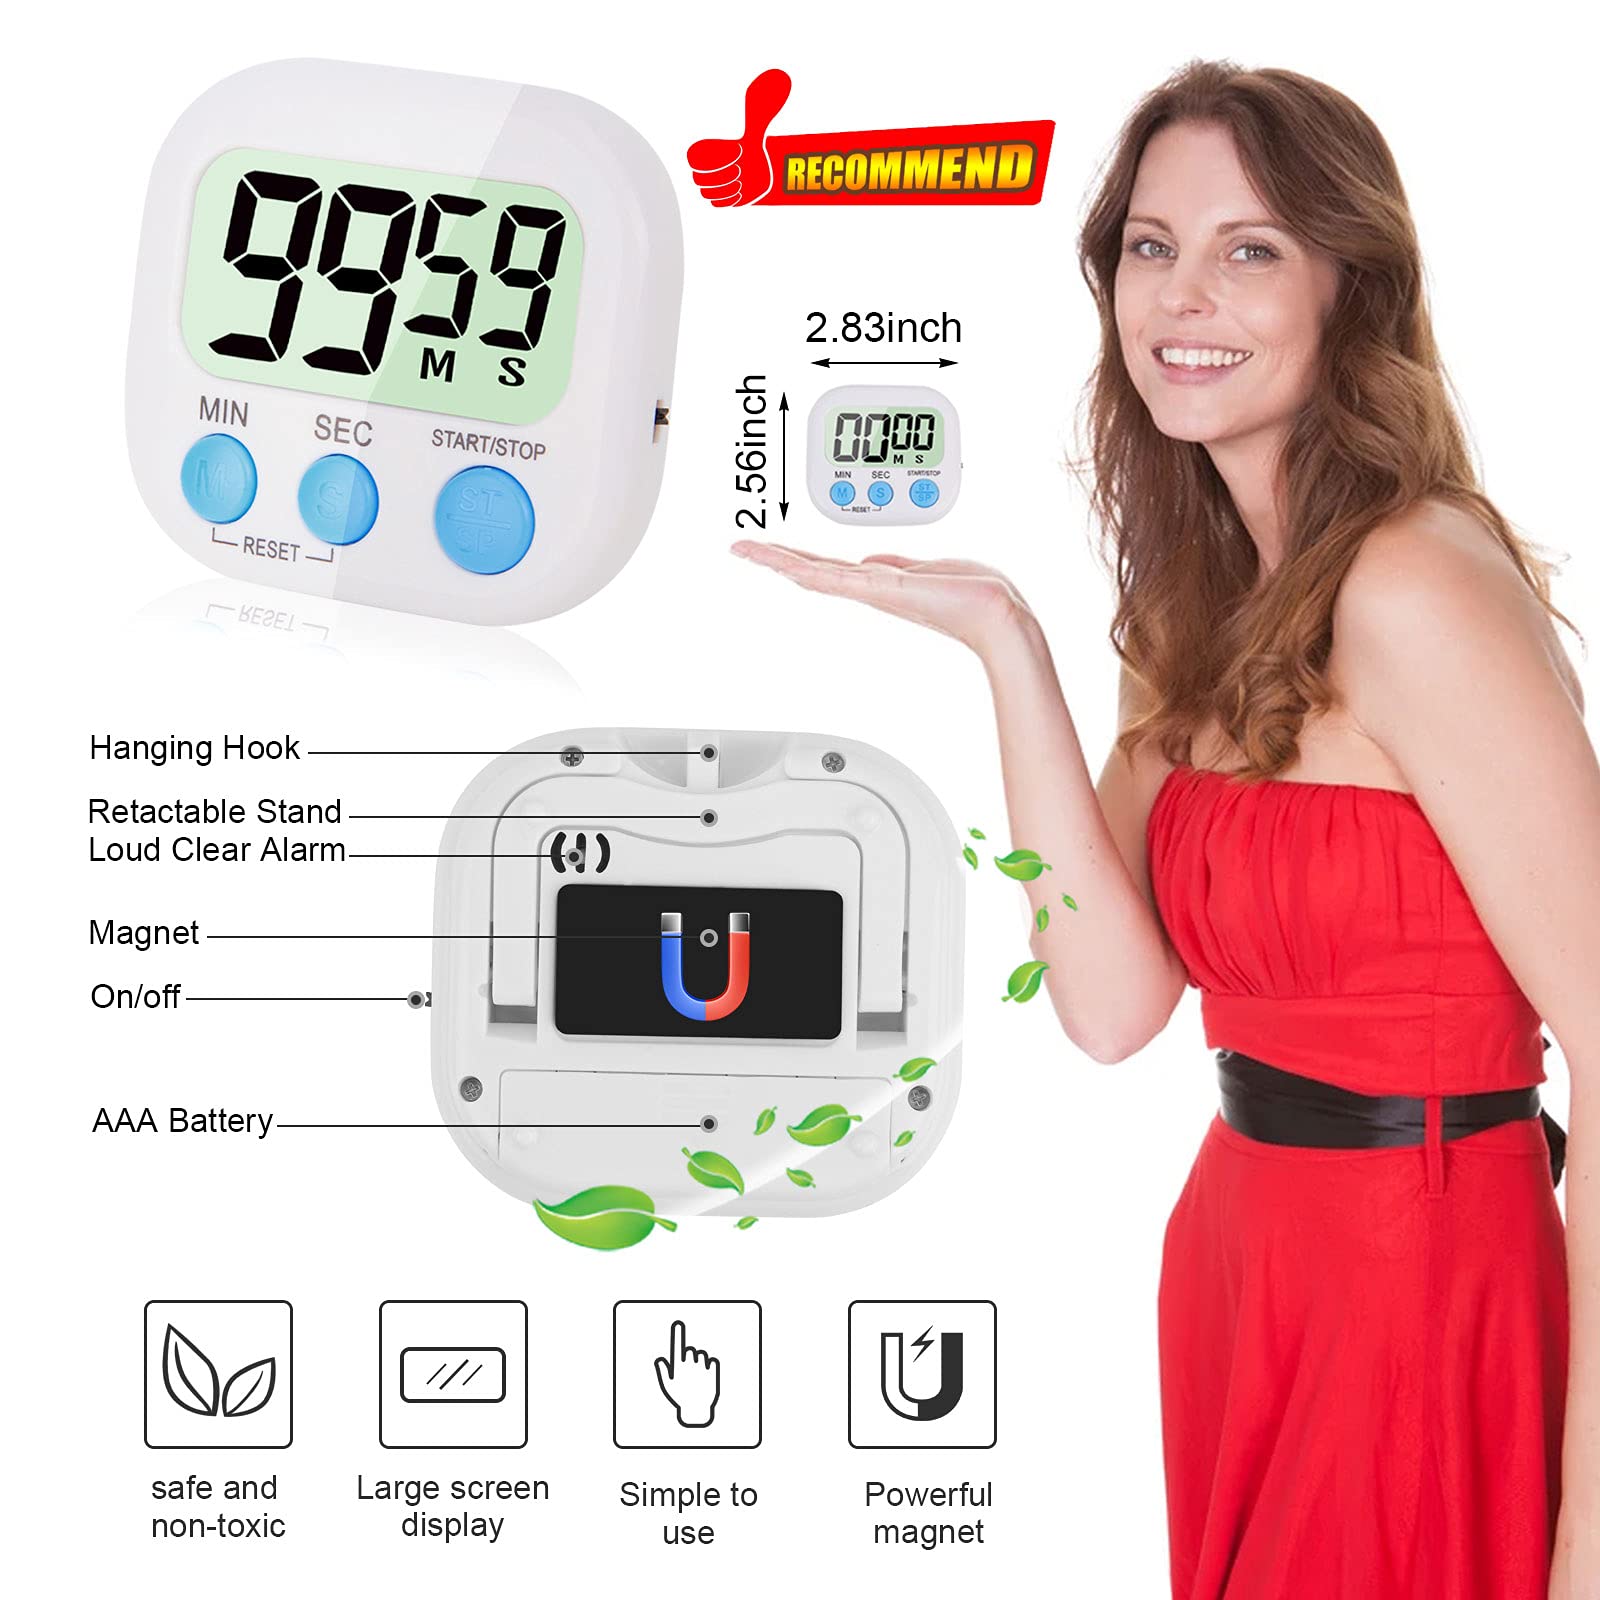 4-Piece Multi-Function Electronic Timer, Kitchen Timer, Learning Management Timer, Suitable for Kitchen, Study, Work, Exercise Training, Outdoor Activities(not Including Battery).